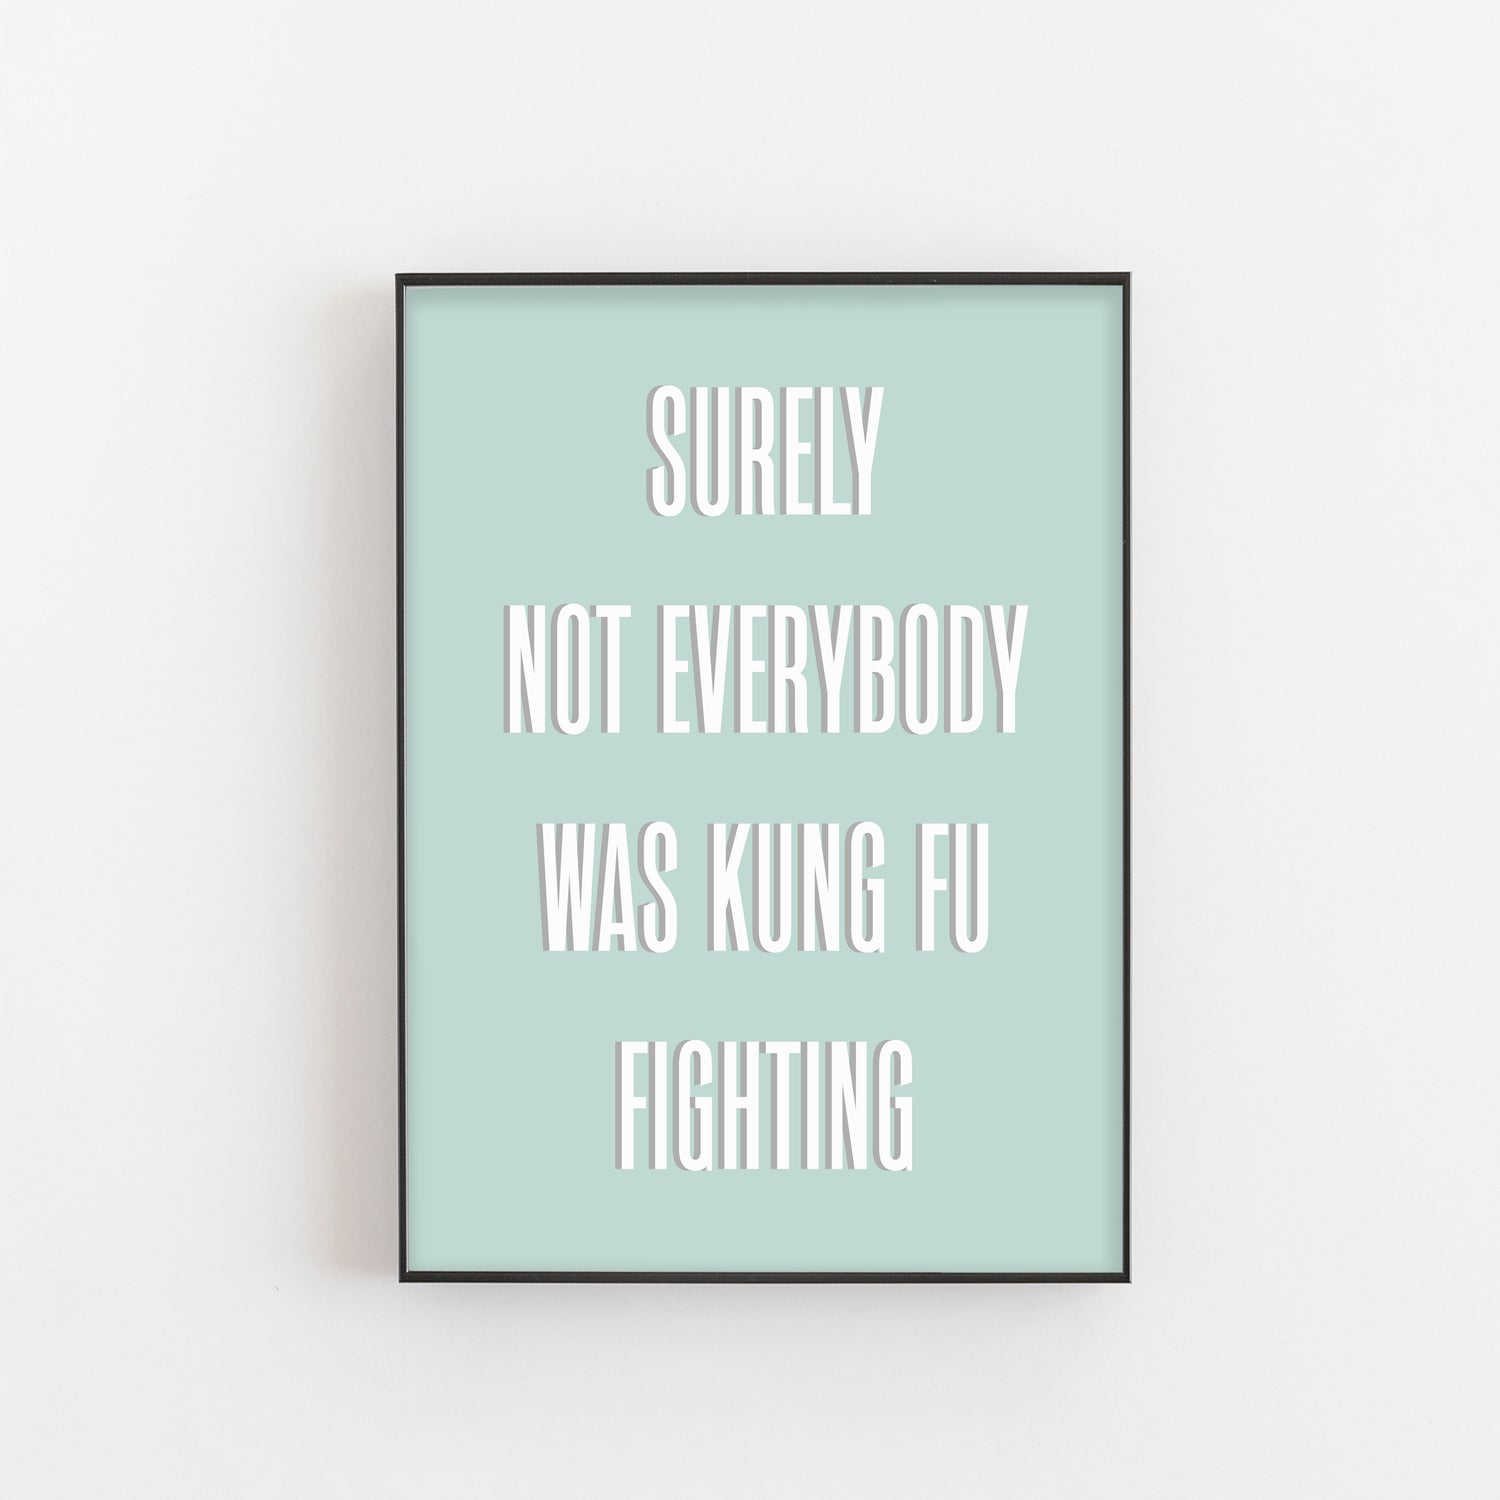 surely not everyone was kung fu fighting Print